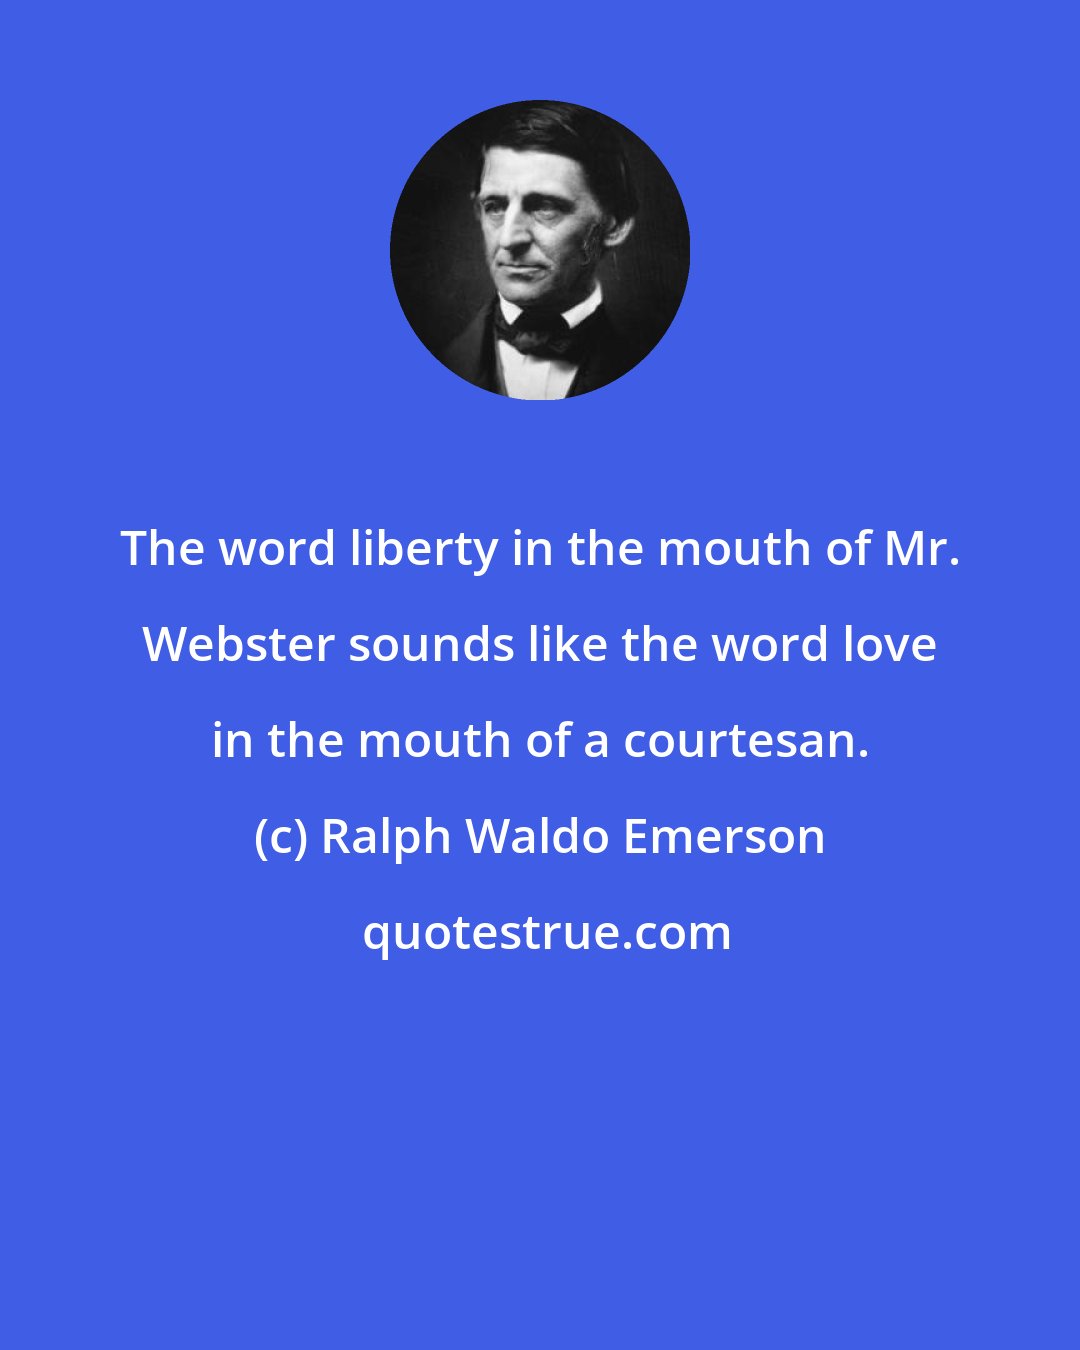 Ralph Waldo Emerson: The word liberty in the mouth of Mr. Webster sounds like the word love in the mouth of a courtesan.